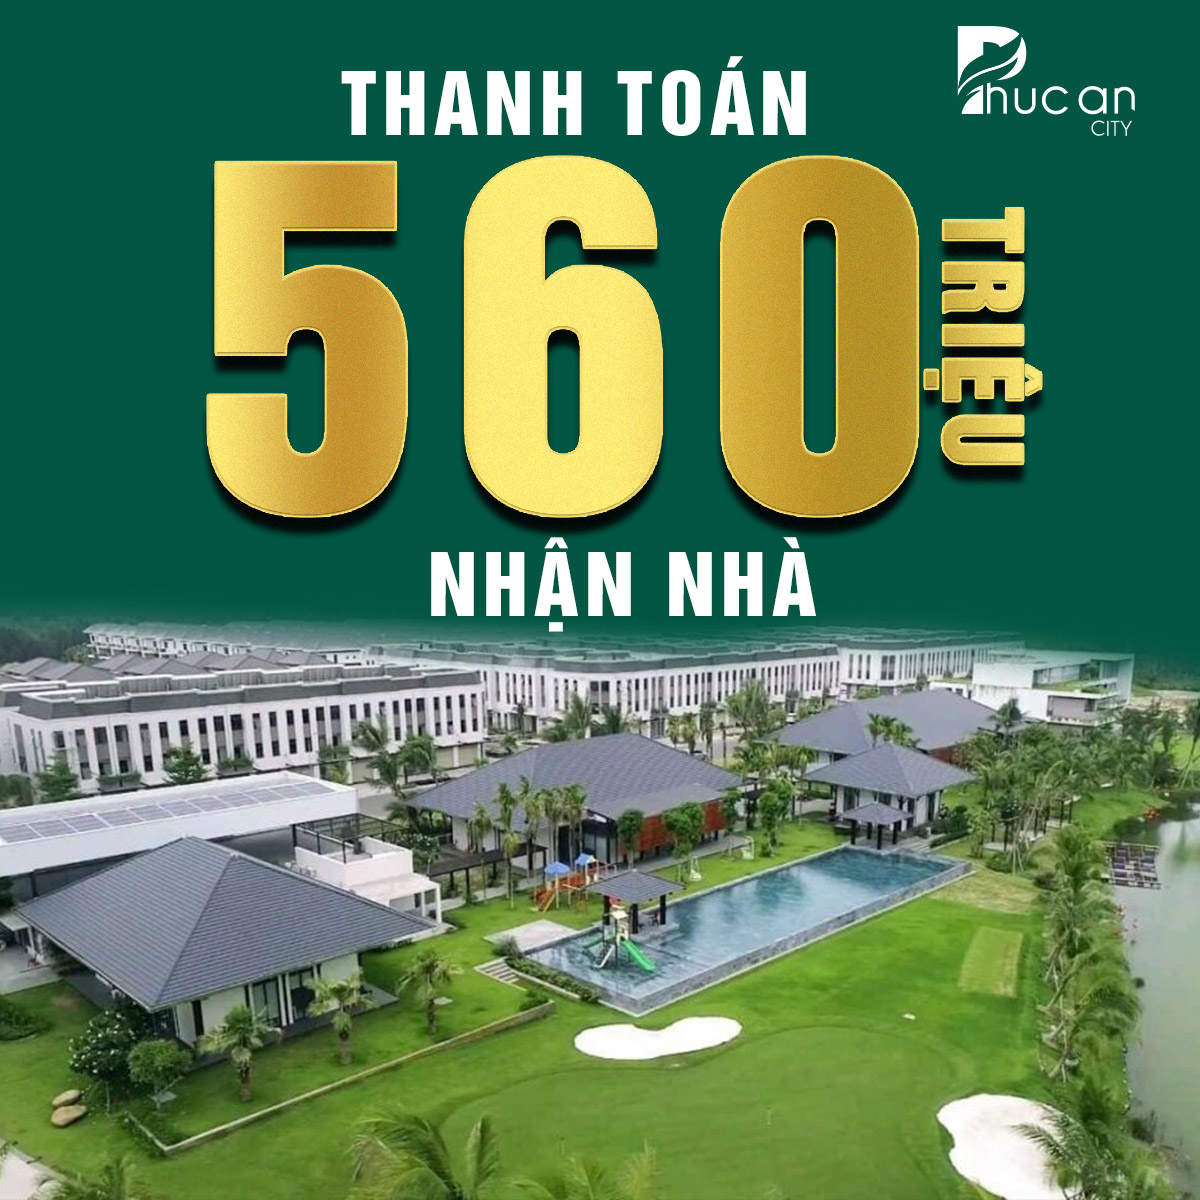 thanh toan 560tr